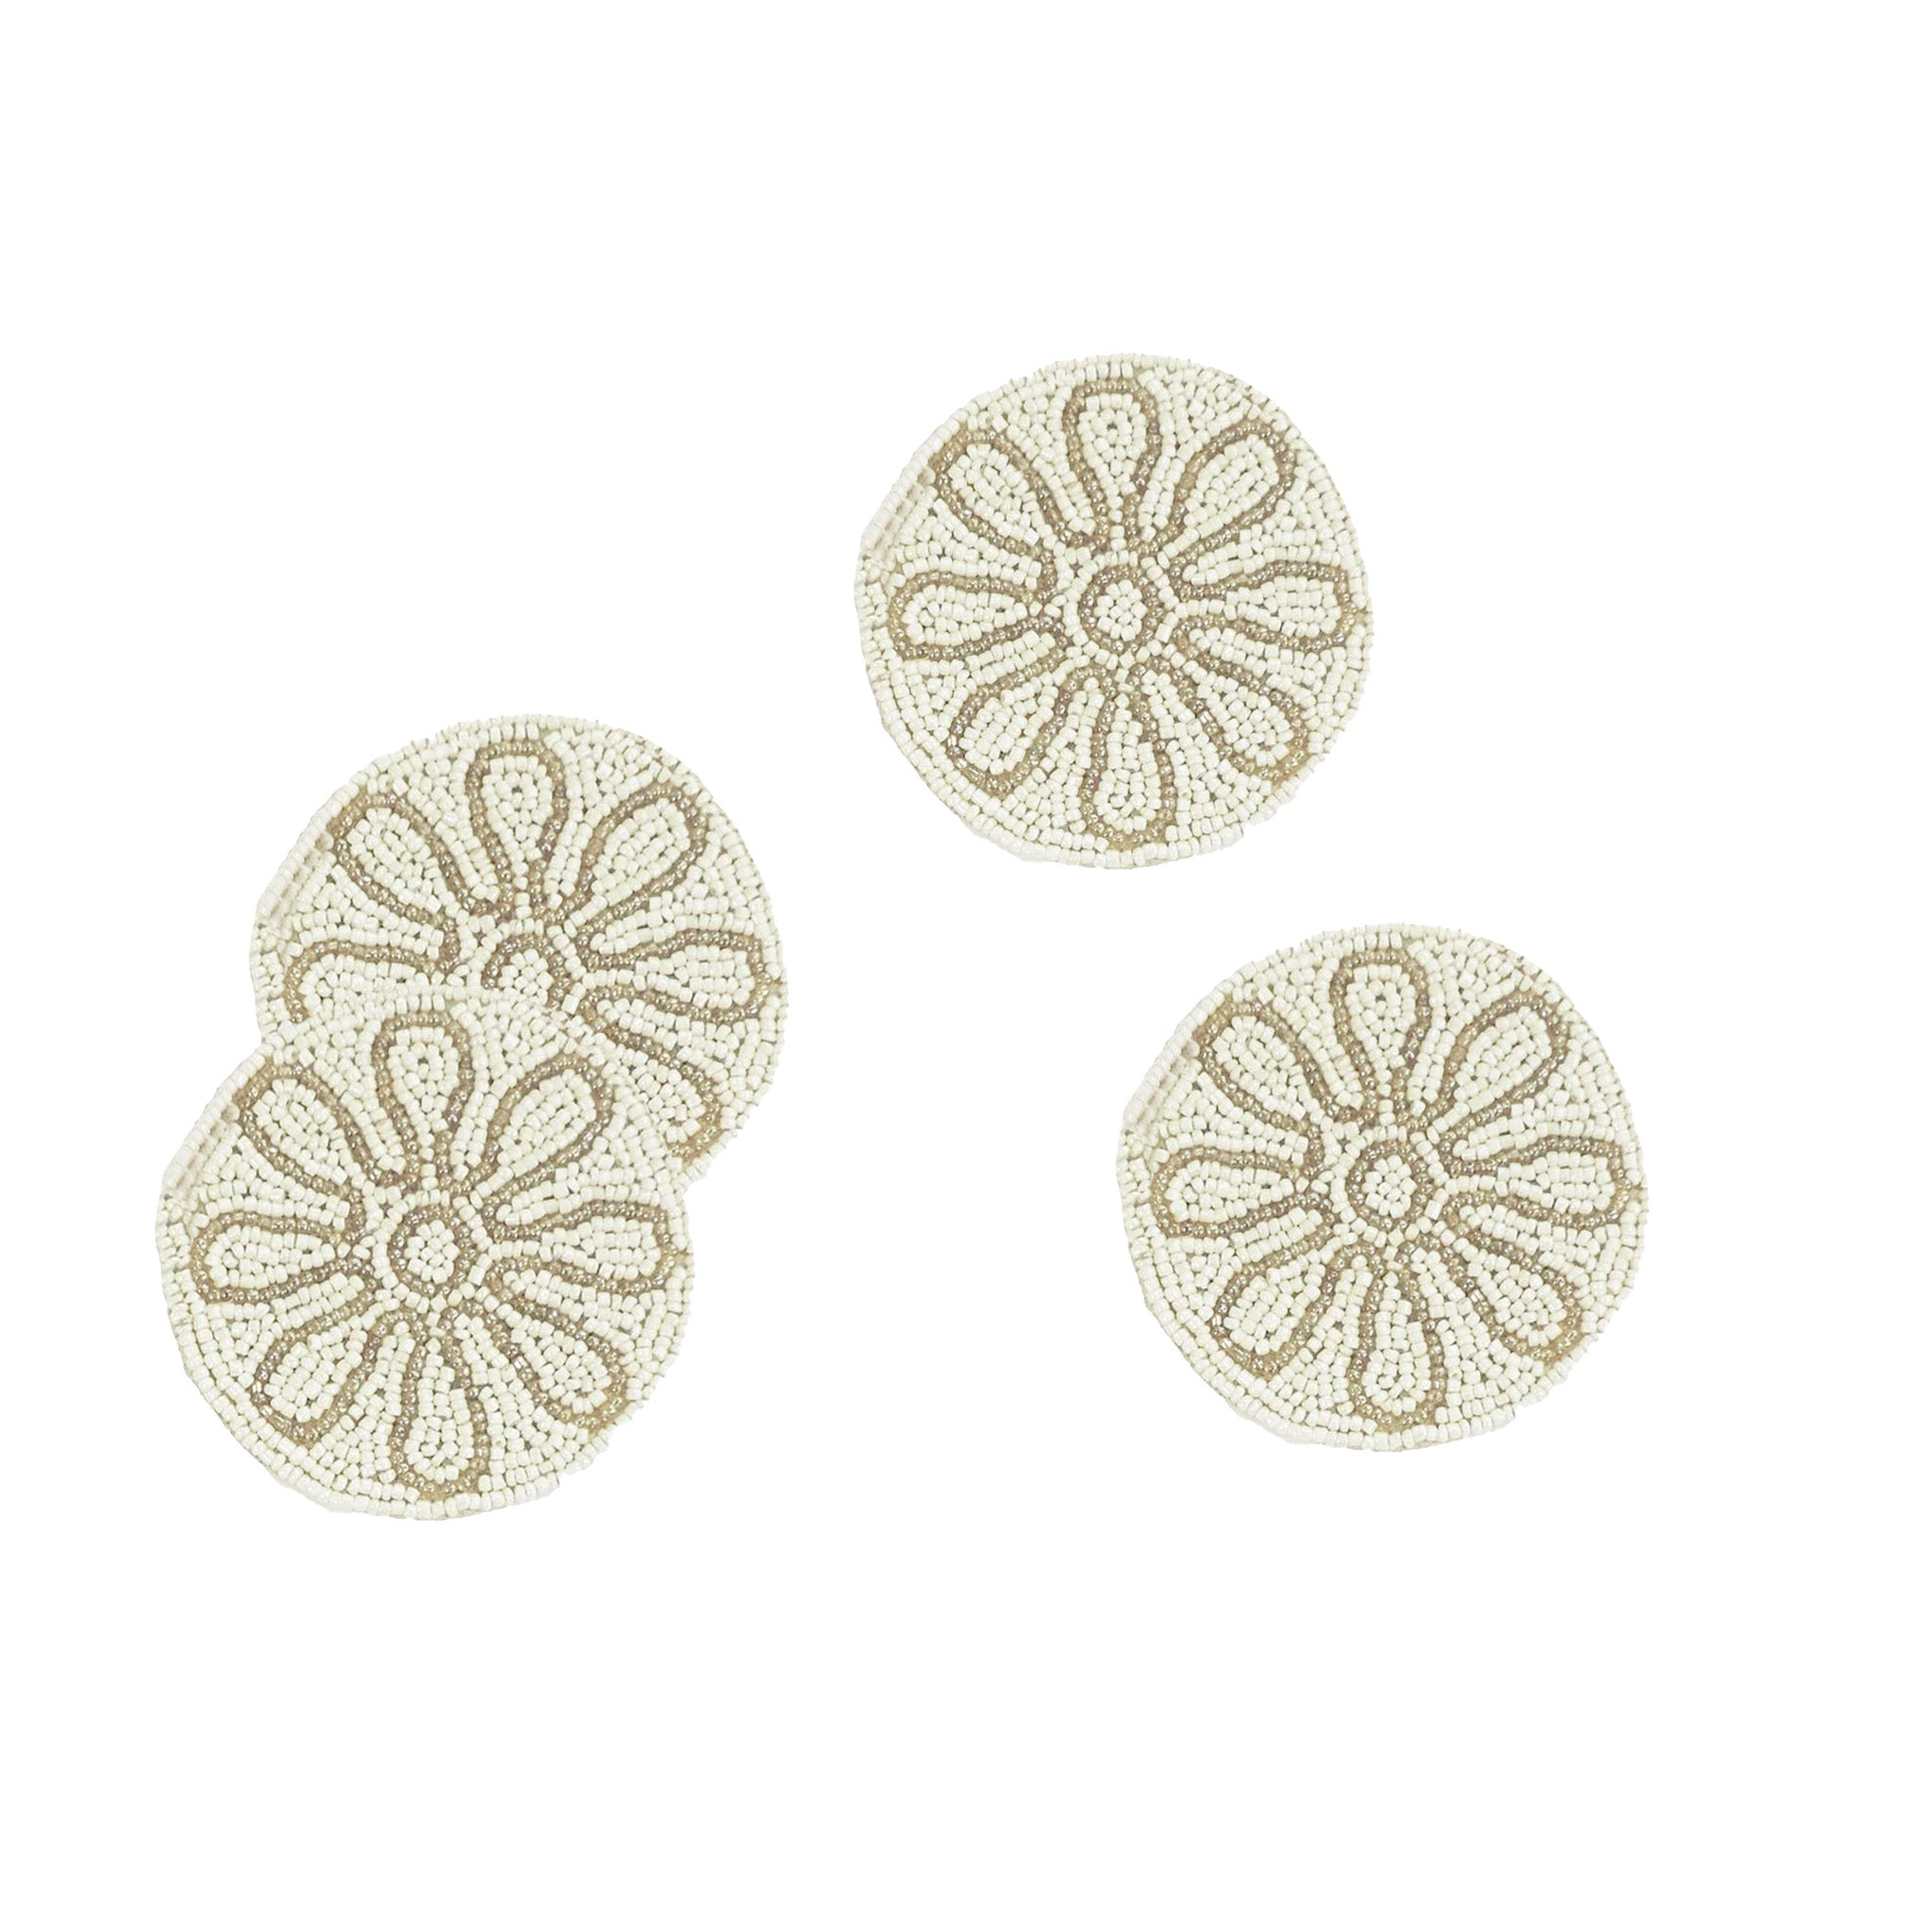 Petal Impressions Embroidered Coaster in Pale Cream, Set of 4